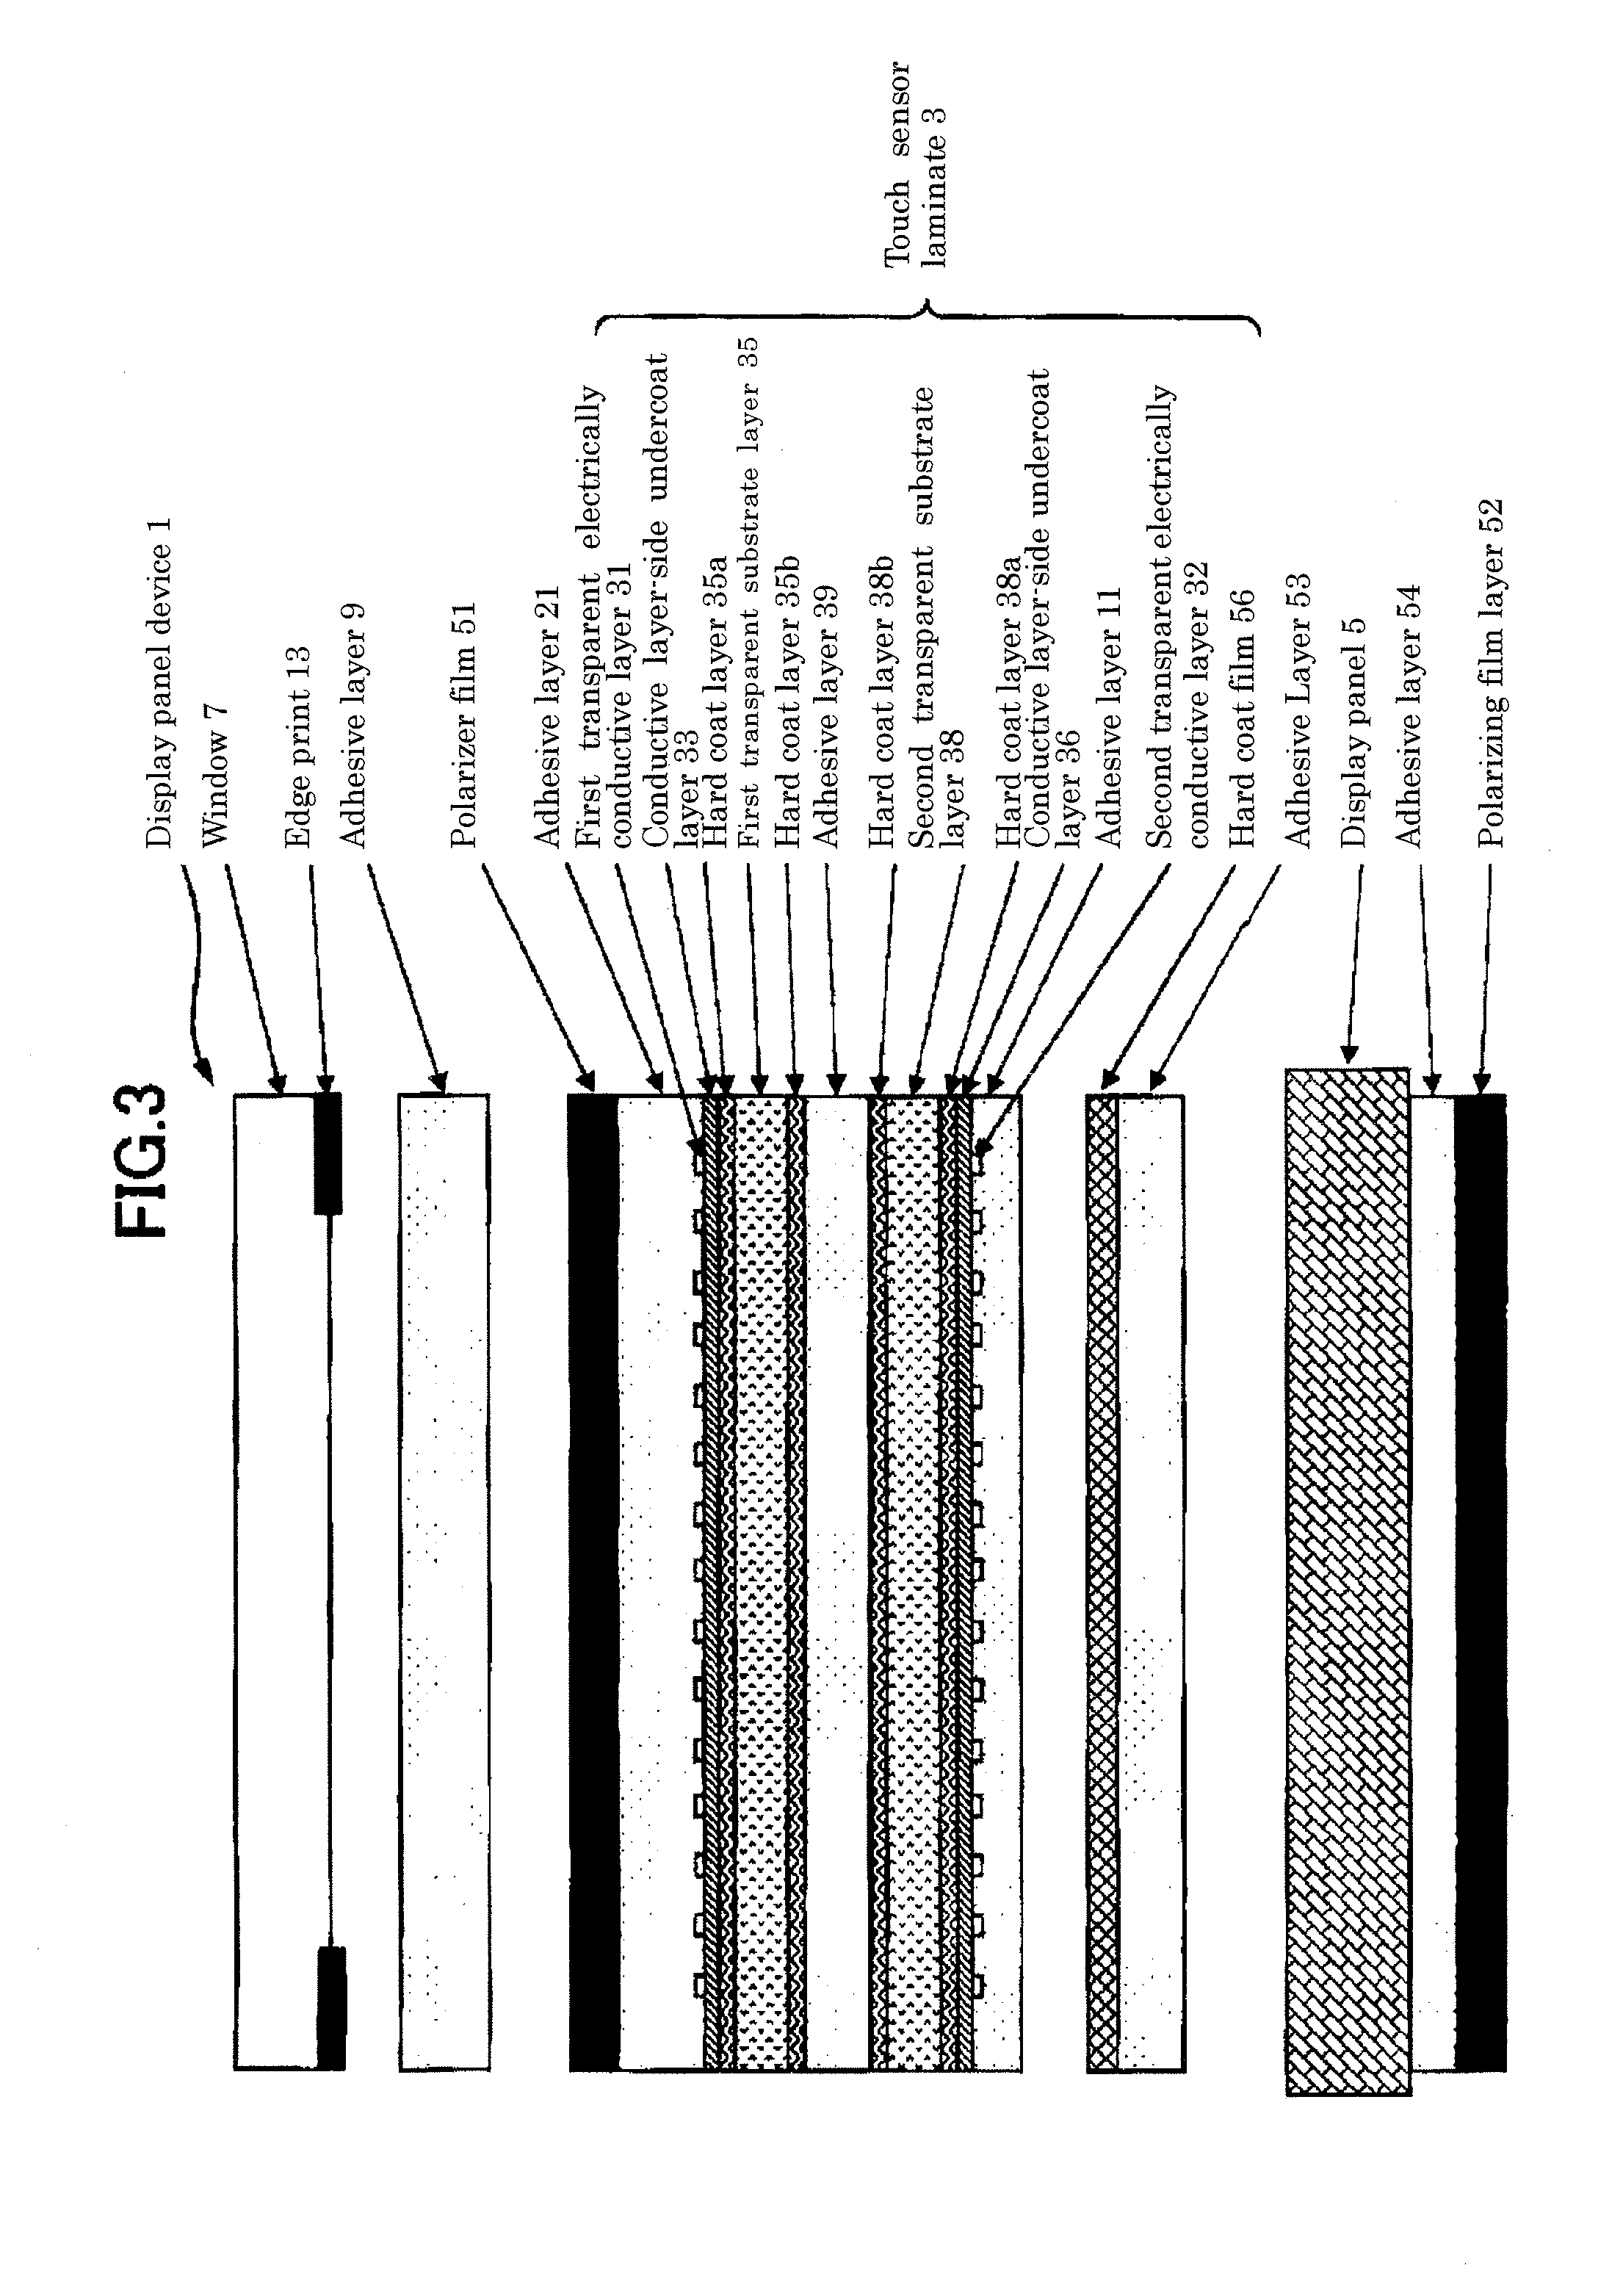 Capacitive touch sensor laminate for display panel device